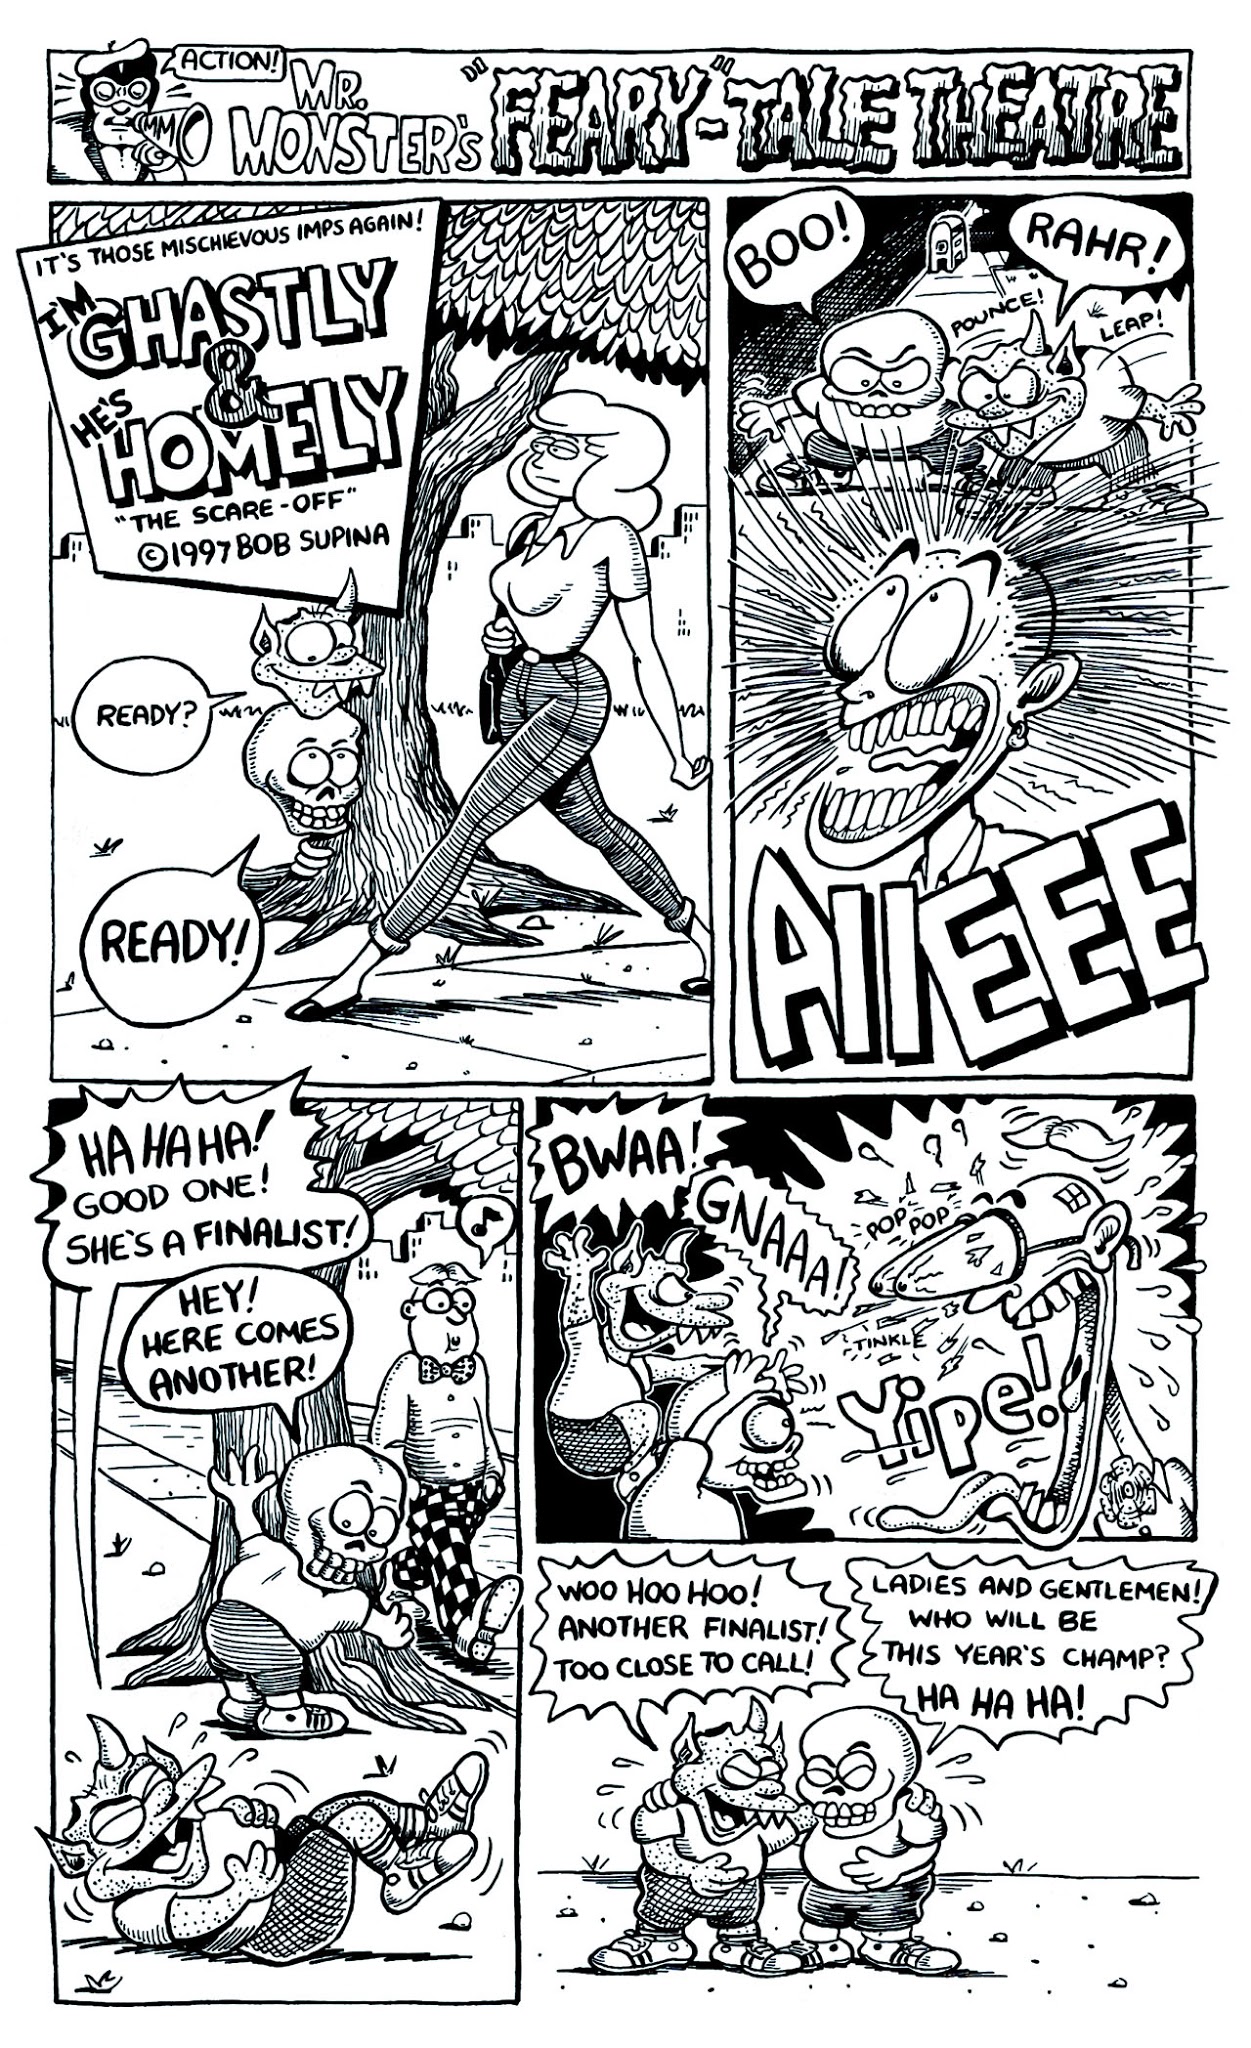 Read online Mr. Monster Presents: (crack-a-boom) comic -  Issue #3 - 19